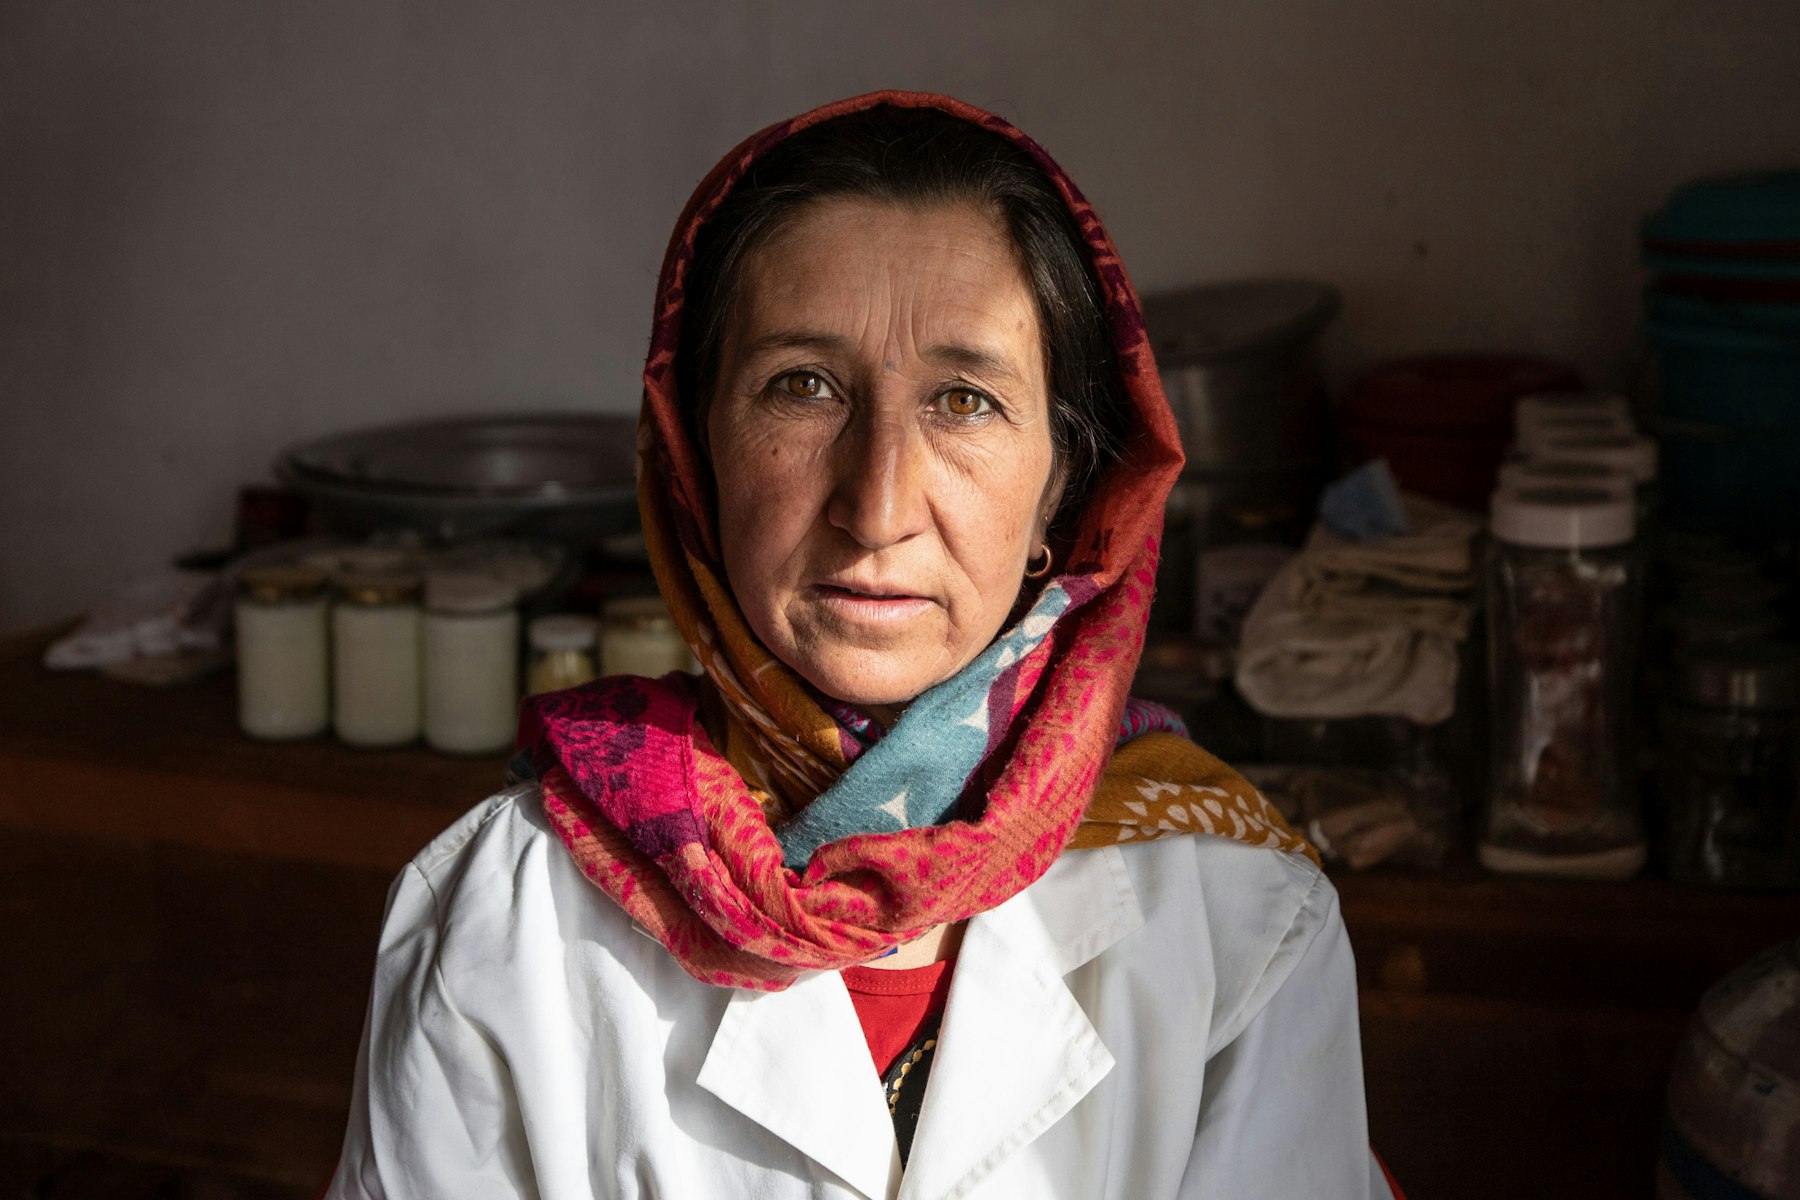 Adeela runs a dairy shop in Ishkashim, Badakhshan. She learnt dairy processing and business skills through AKF-led training and now earns a steady income at her local dairy shop, selling milk and butter to her community.